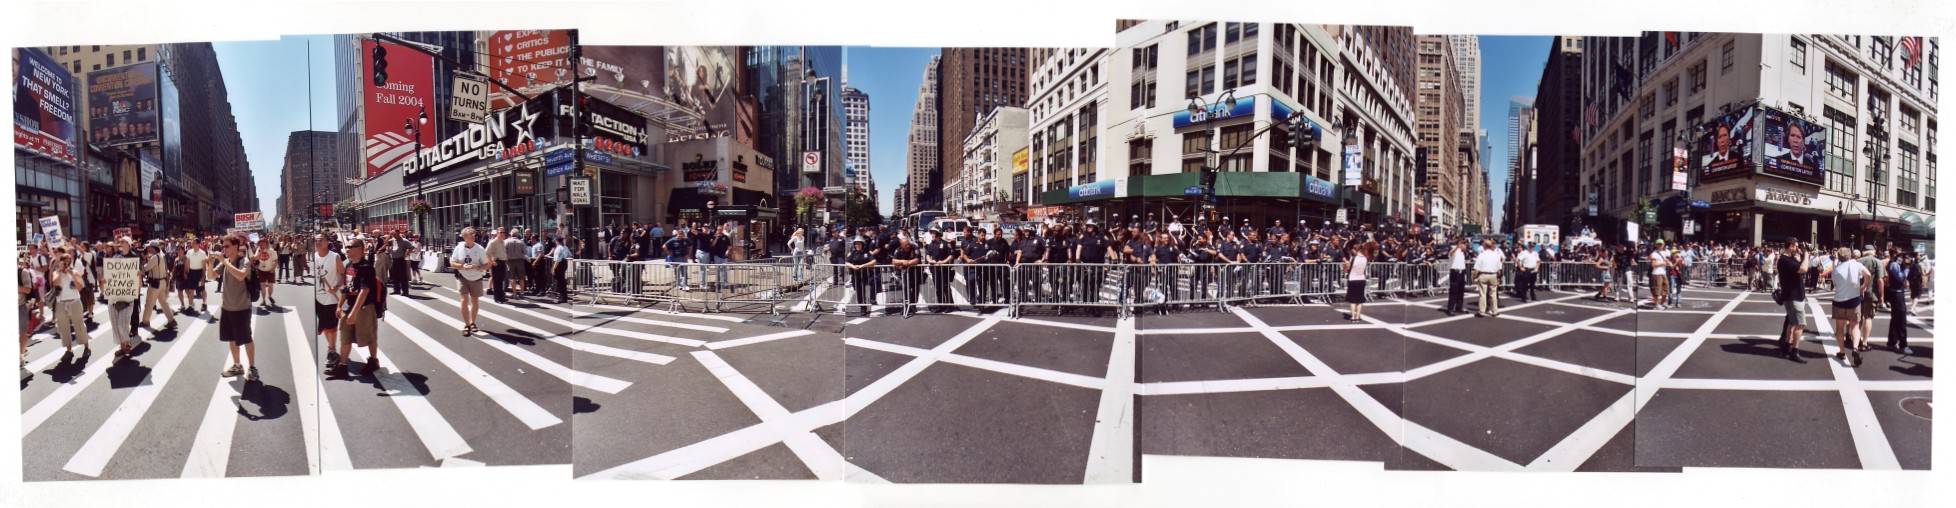 Police at Republican National Convention (2004)